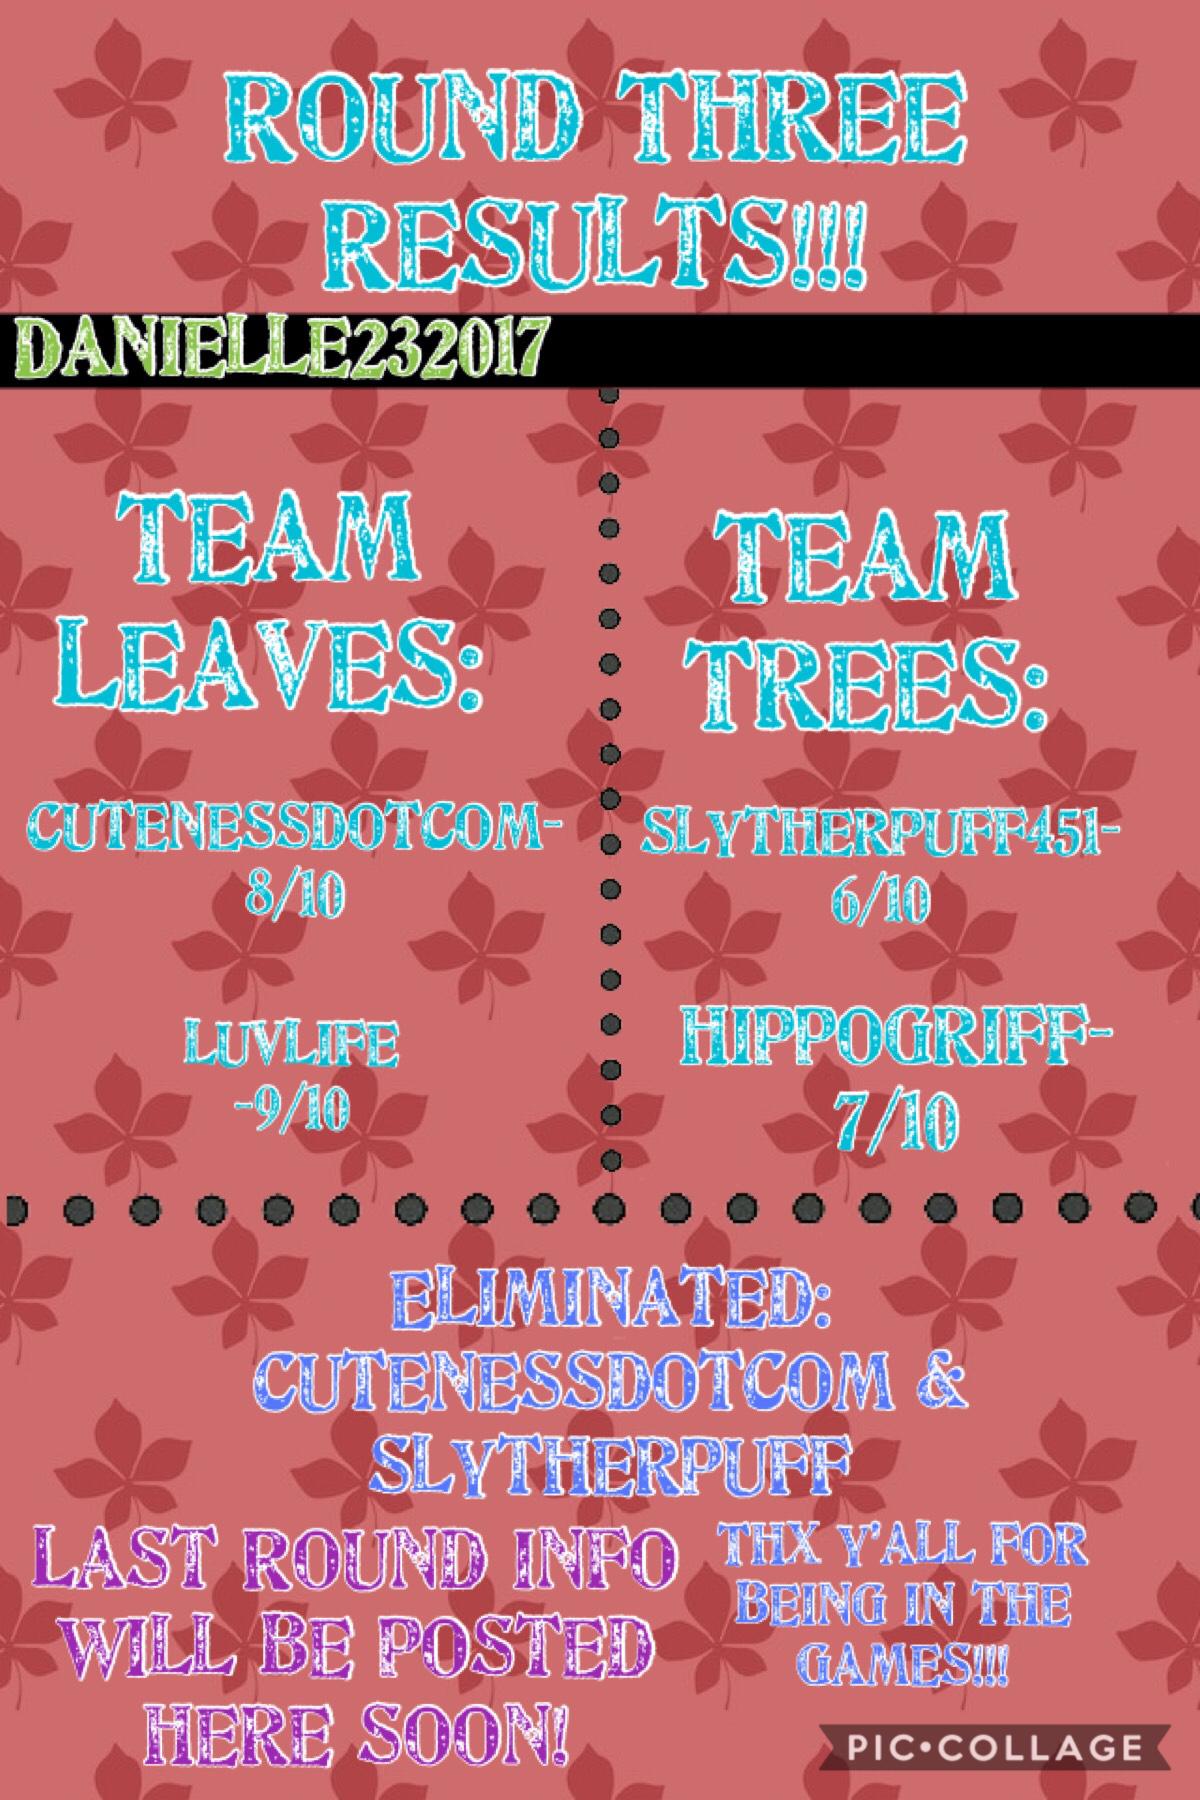 Tap
Thanks for participating in the Fall Games!!!
Eliminated: Cutenessdotcom & Slytherpuff451